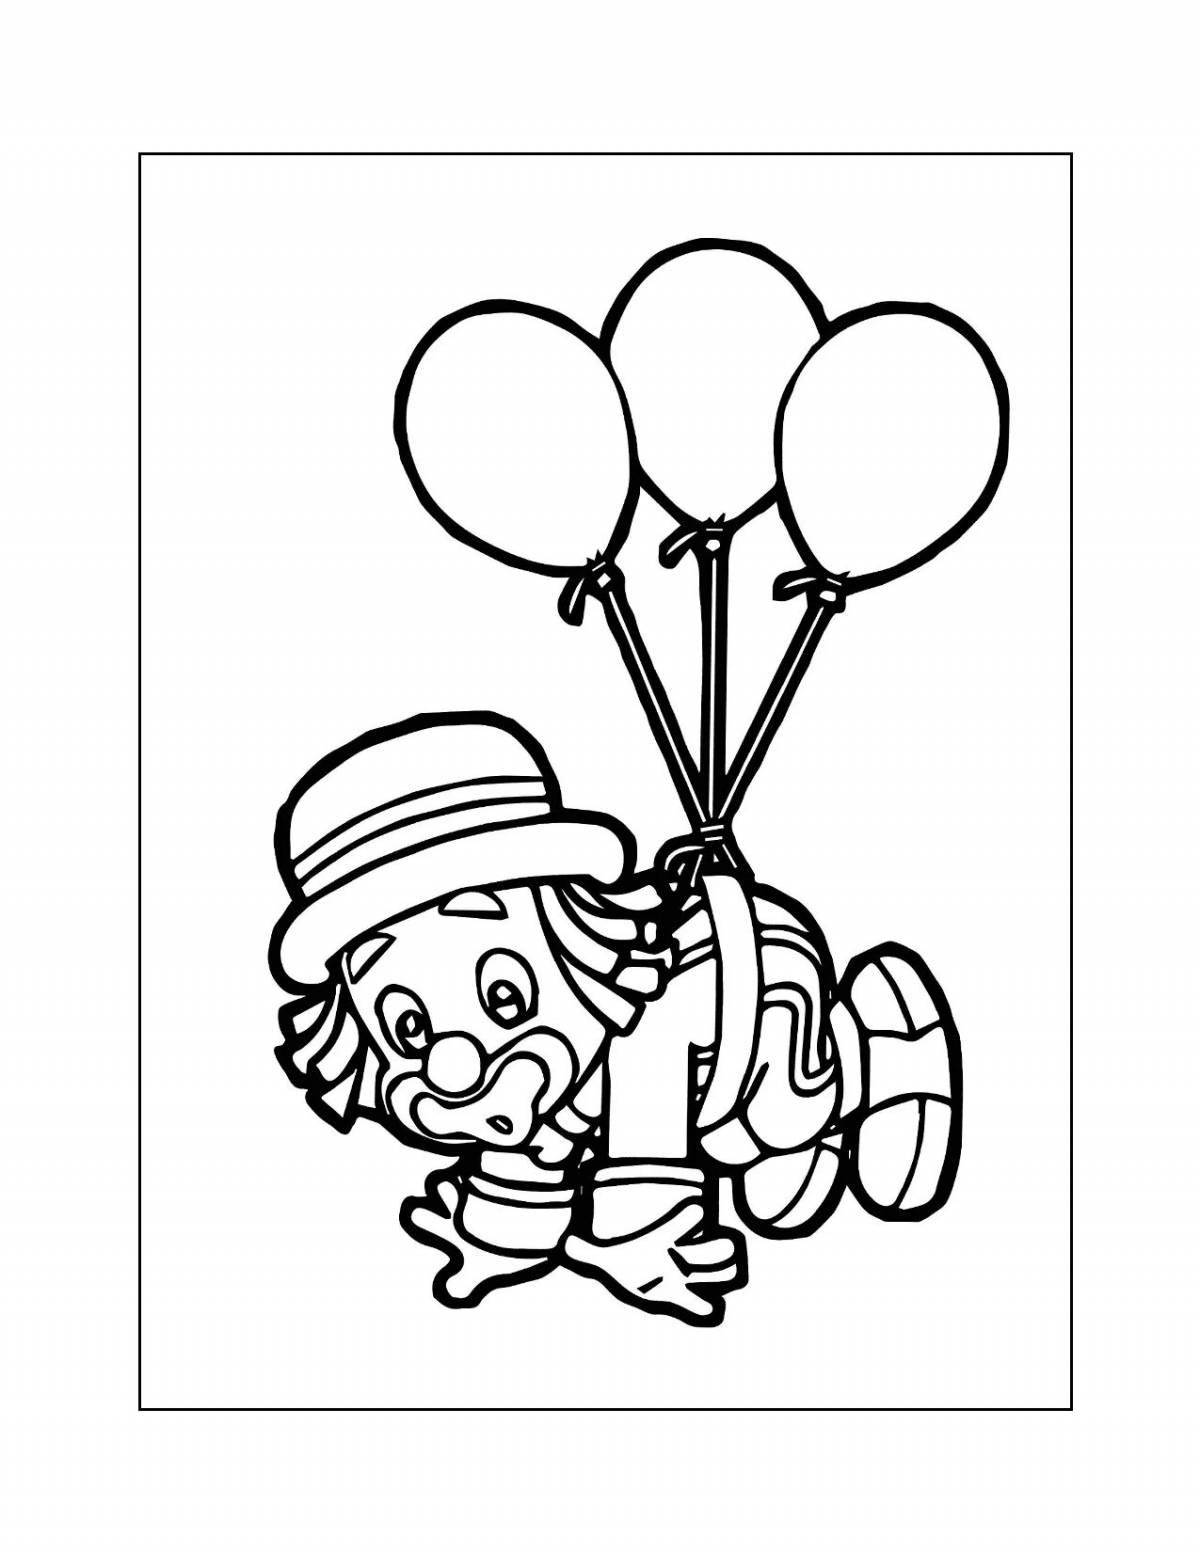 Playful clown with balloons